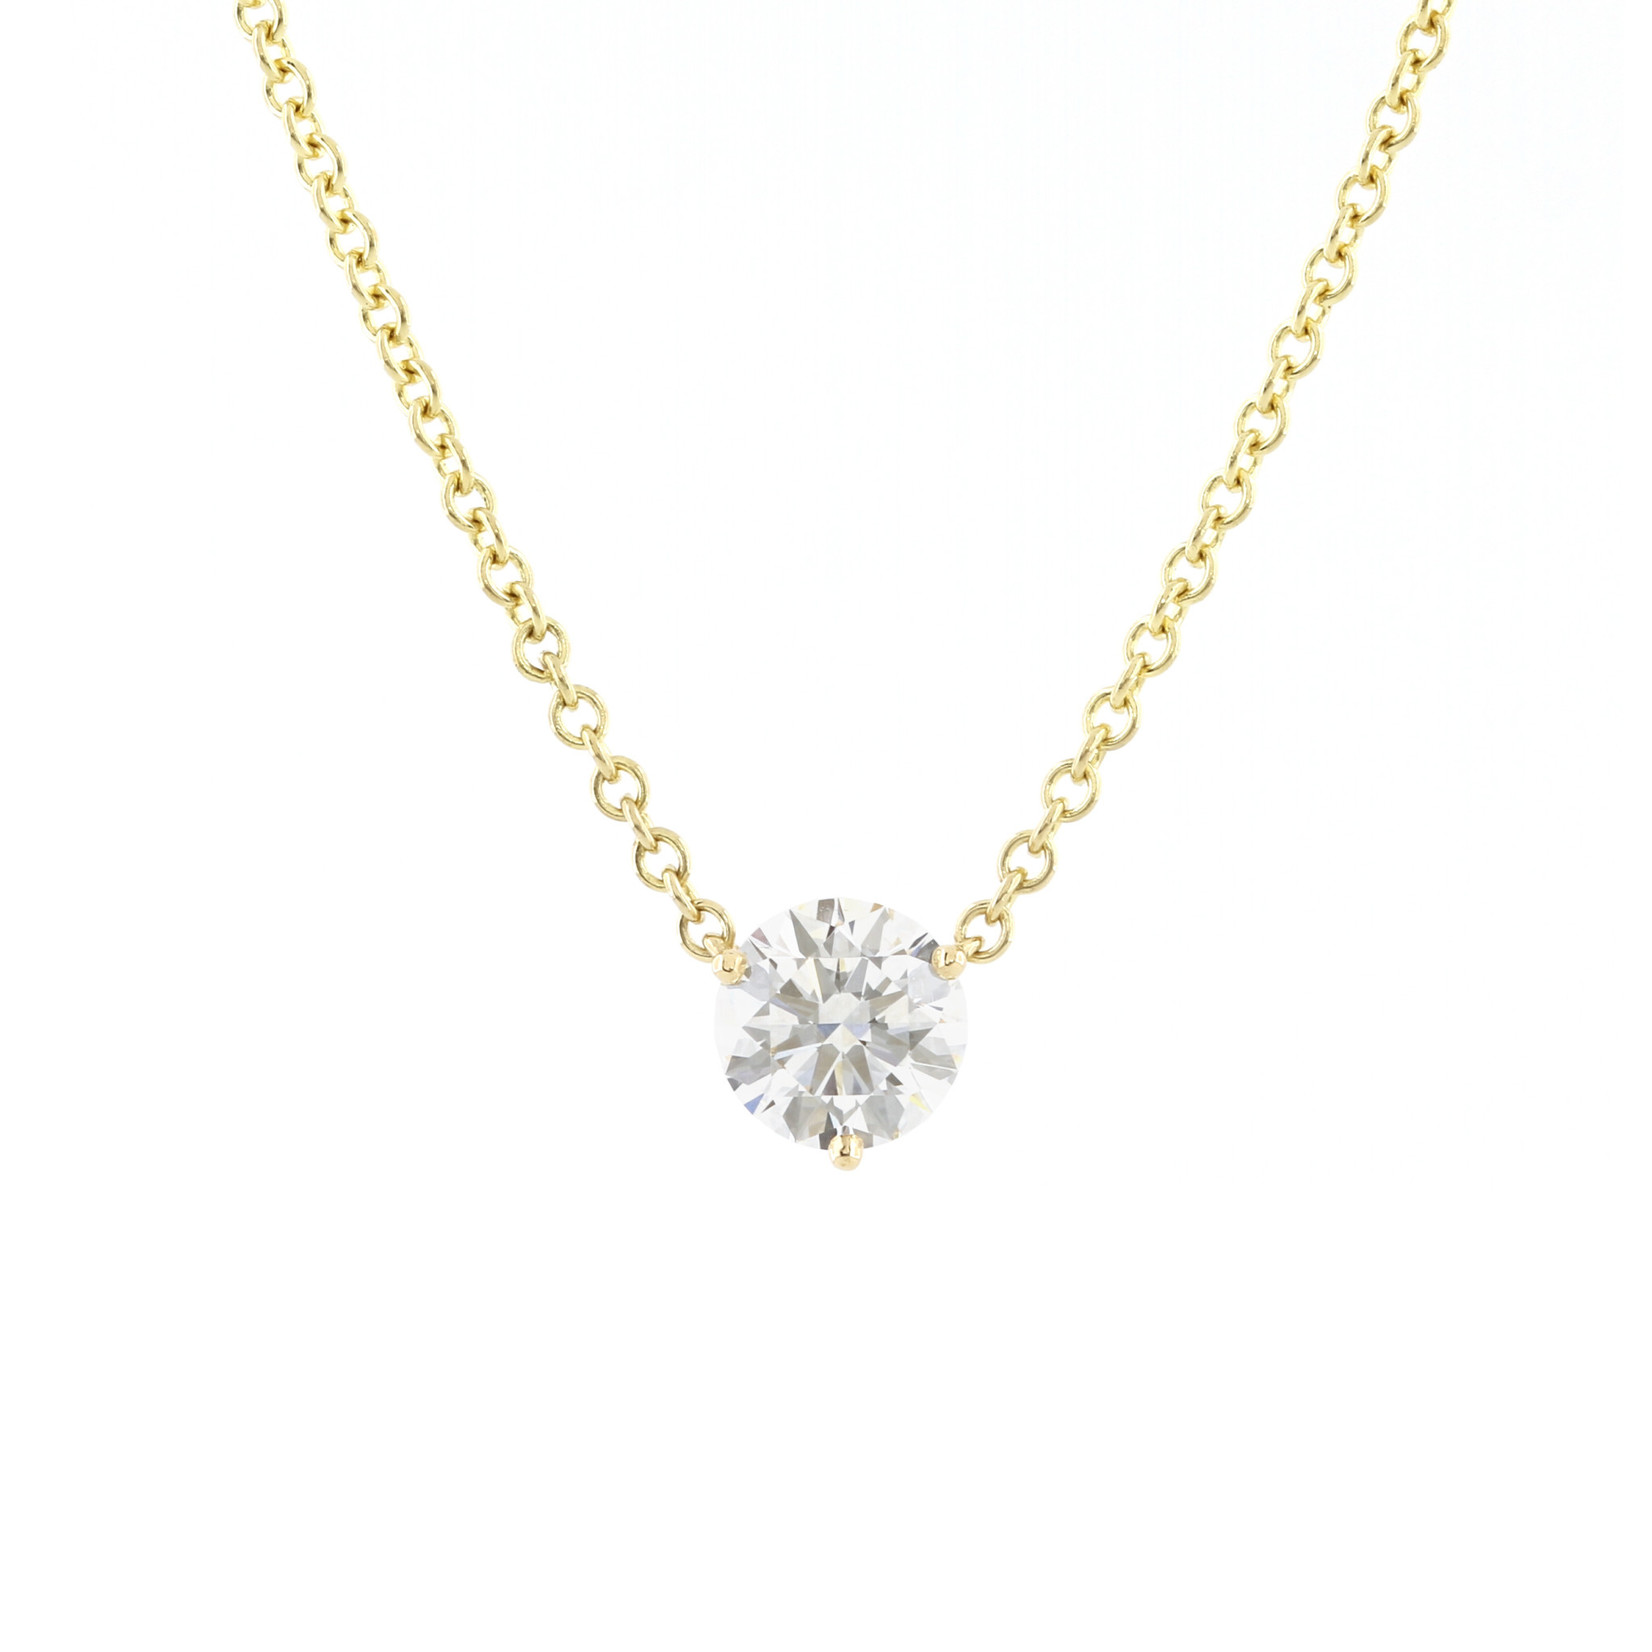 Baxter Moerman Diamond Solitaire Necklace 1.01ct in Yellow Gold